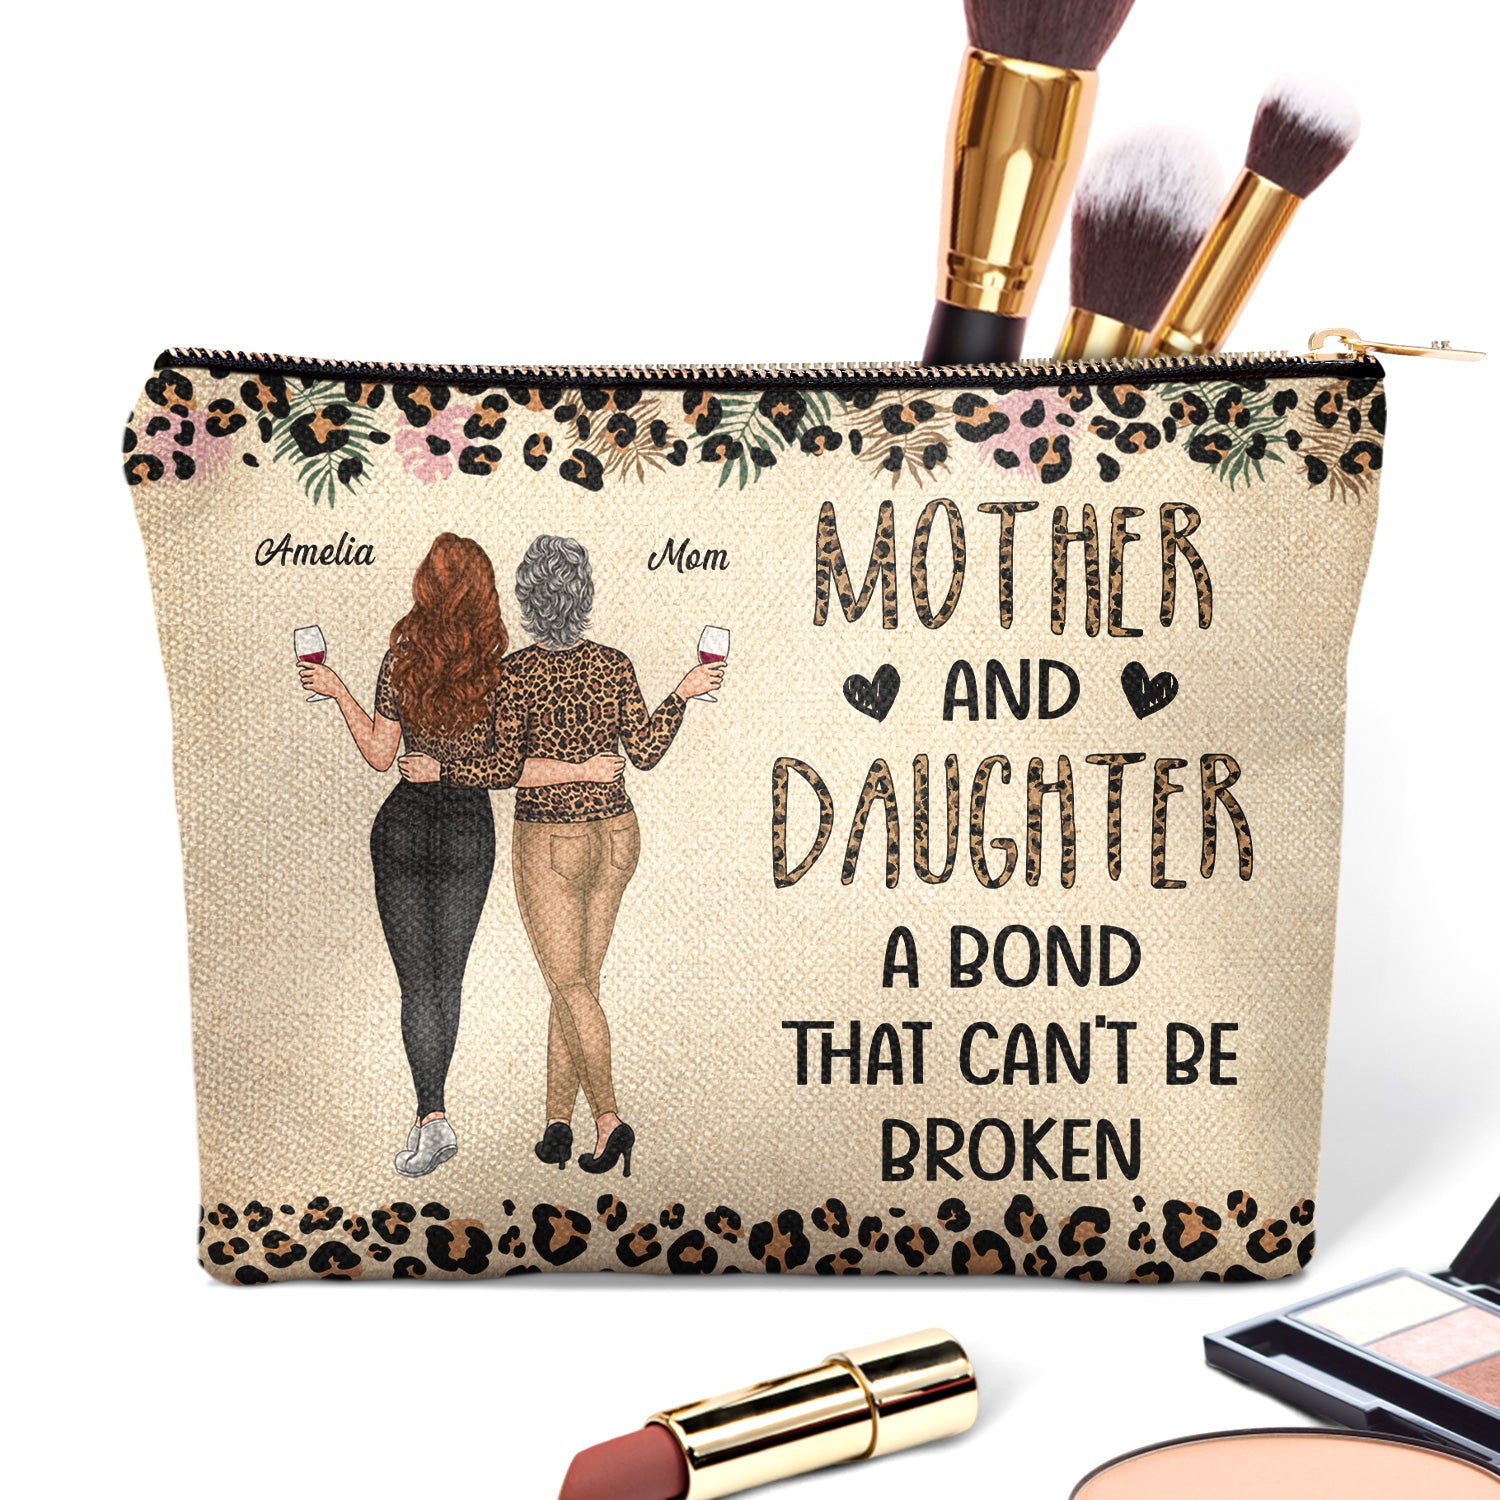 Mother & Daughter A Bond That Can't Be Broken - Gift For Mom, Mother, Grandma - Personalized Cosmetic Bag